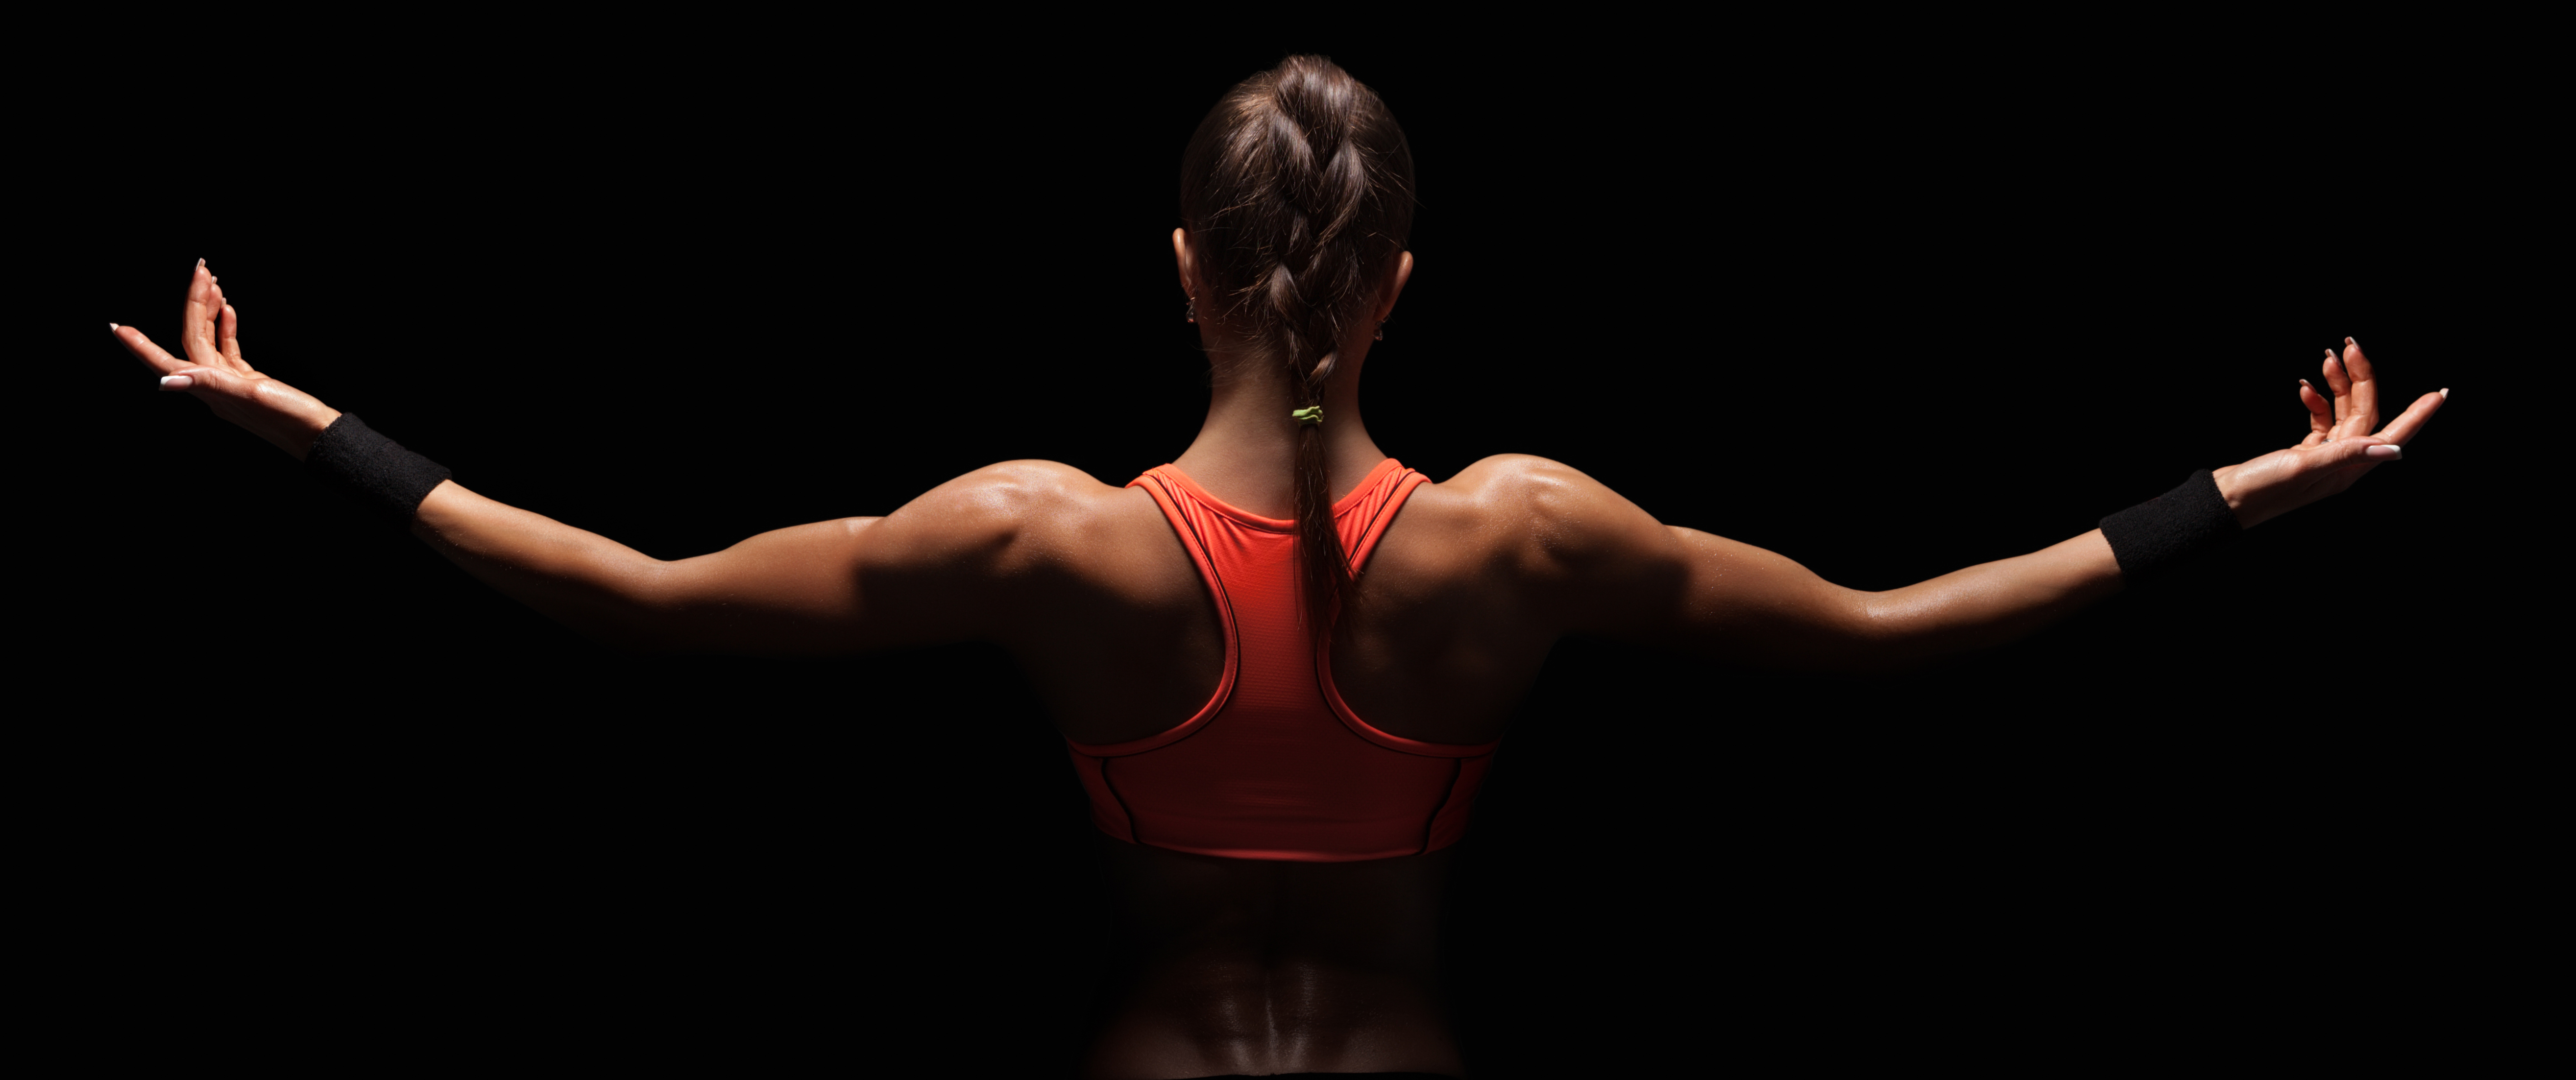 Wallpaper woman, back, workout, fitness girl for mobile and